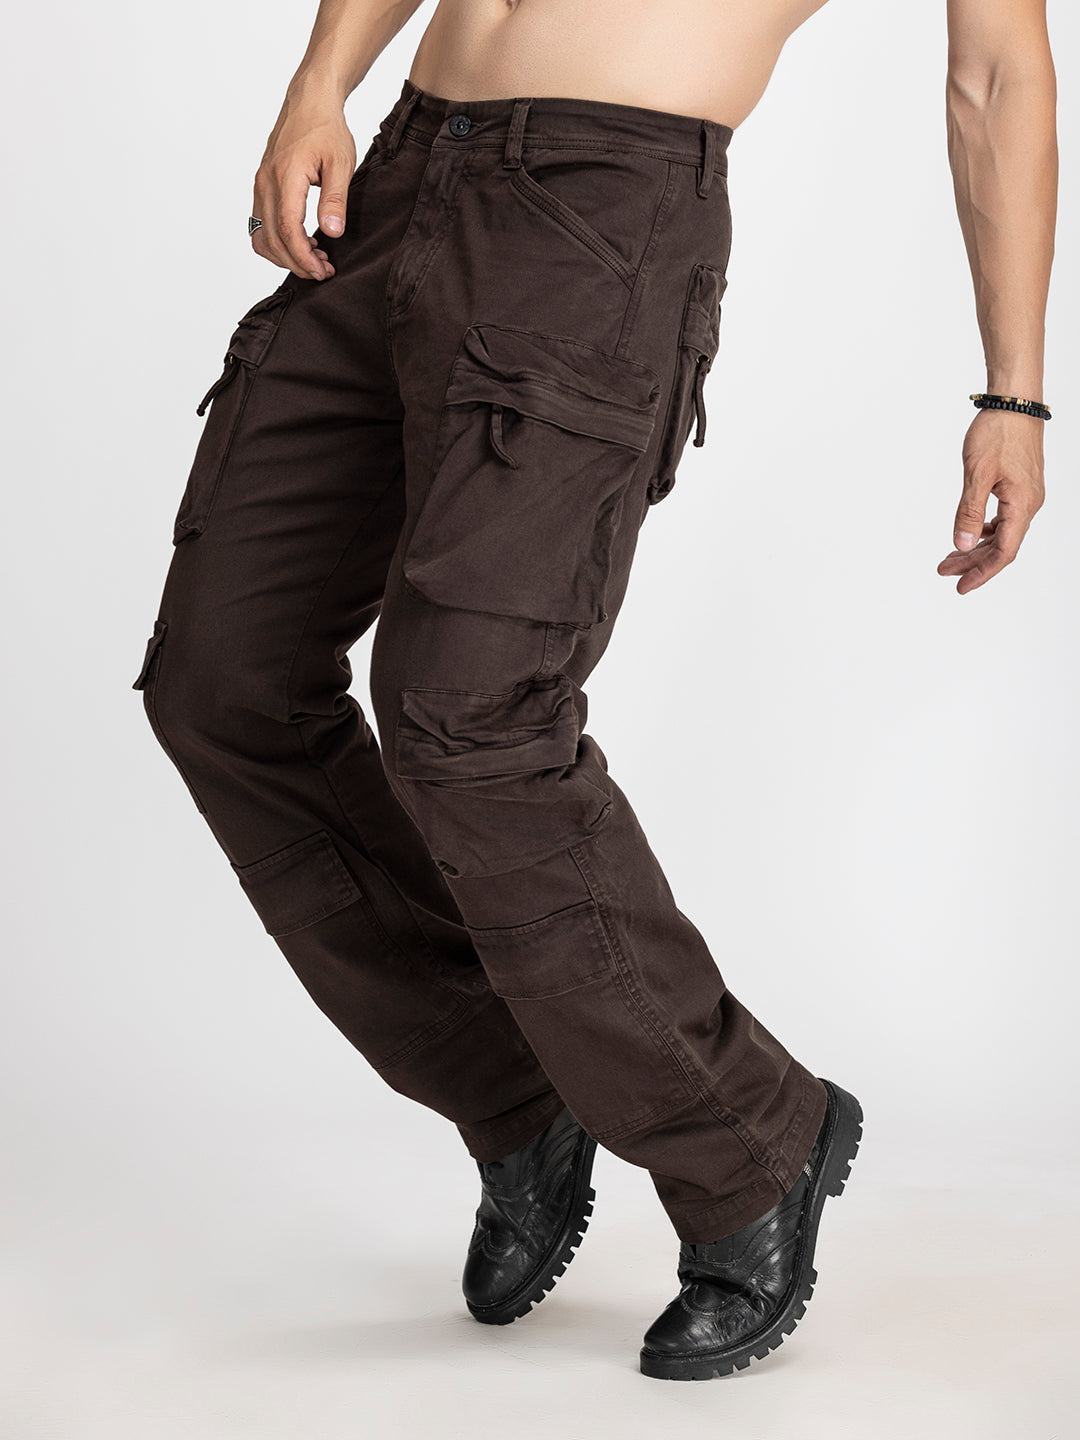 Baggy Utility Pants-10 pockets Brown